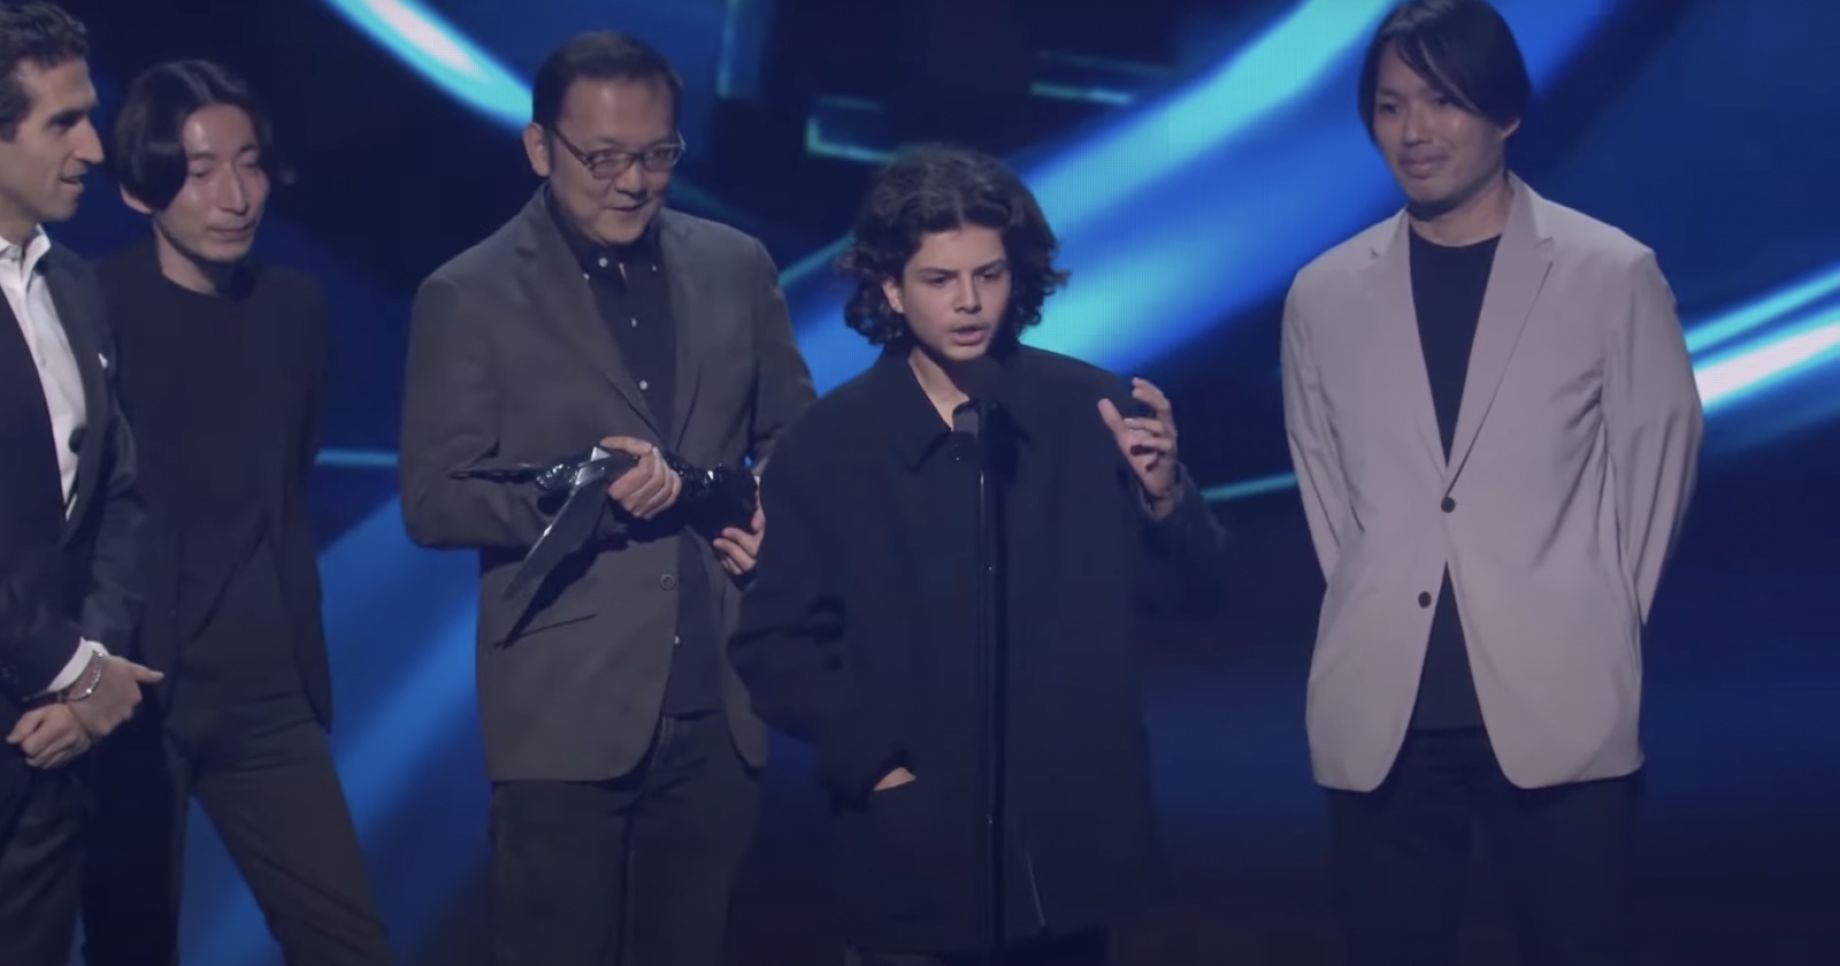 Game Awards Security Will Be Tightened After Recent Incidents